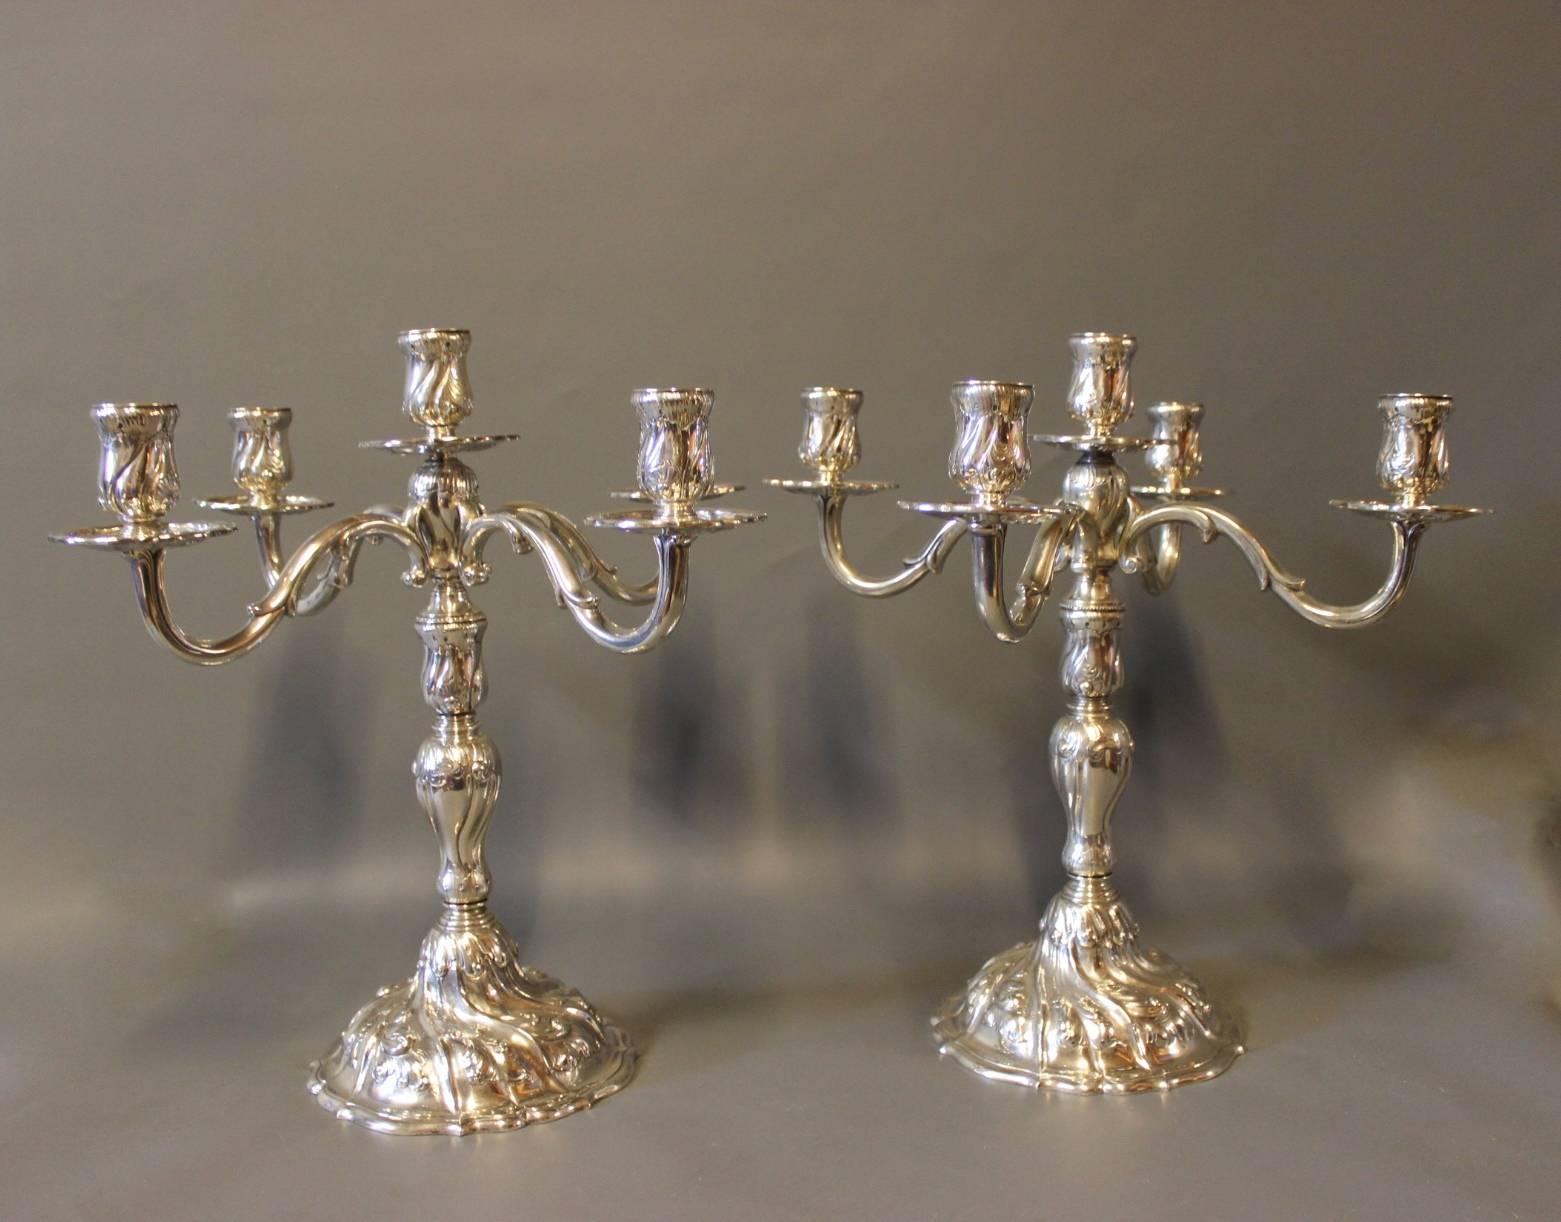 A pair of five armed candelabra in 925 sterling silver by English Silver House and stamped AxS. They are newly polished and in great condition.